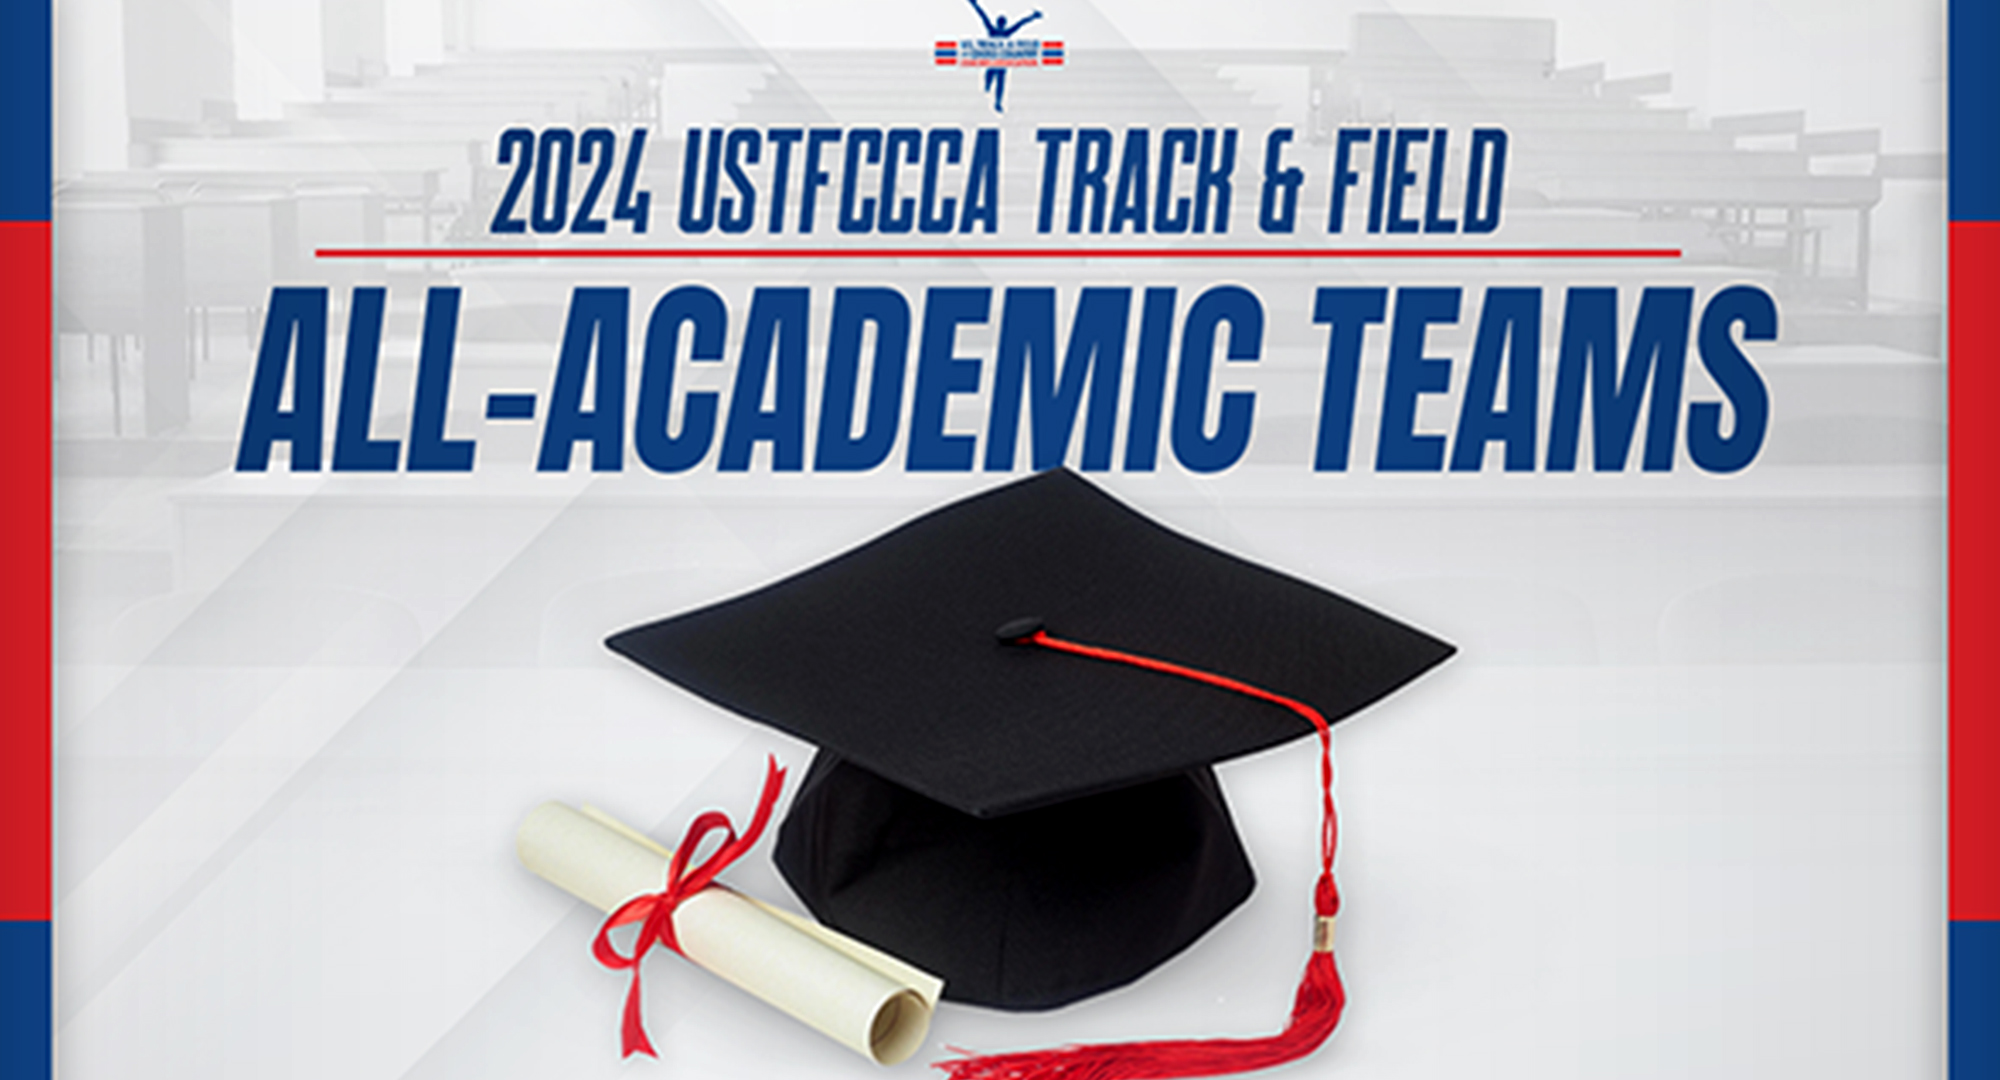 Concordia earned U.S. Track & Field and Cross Country Coaches Association (USTFCCCA) All-Academic Team honors.